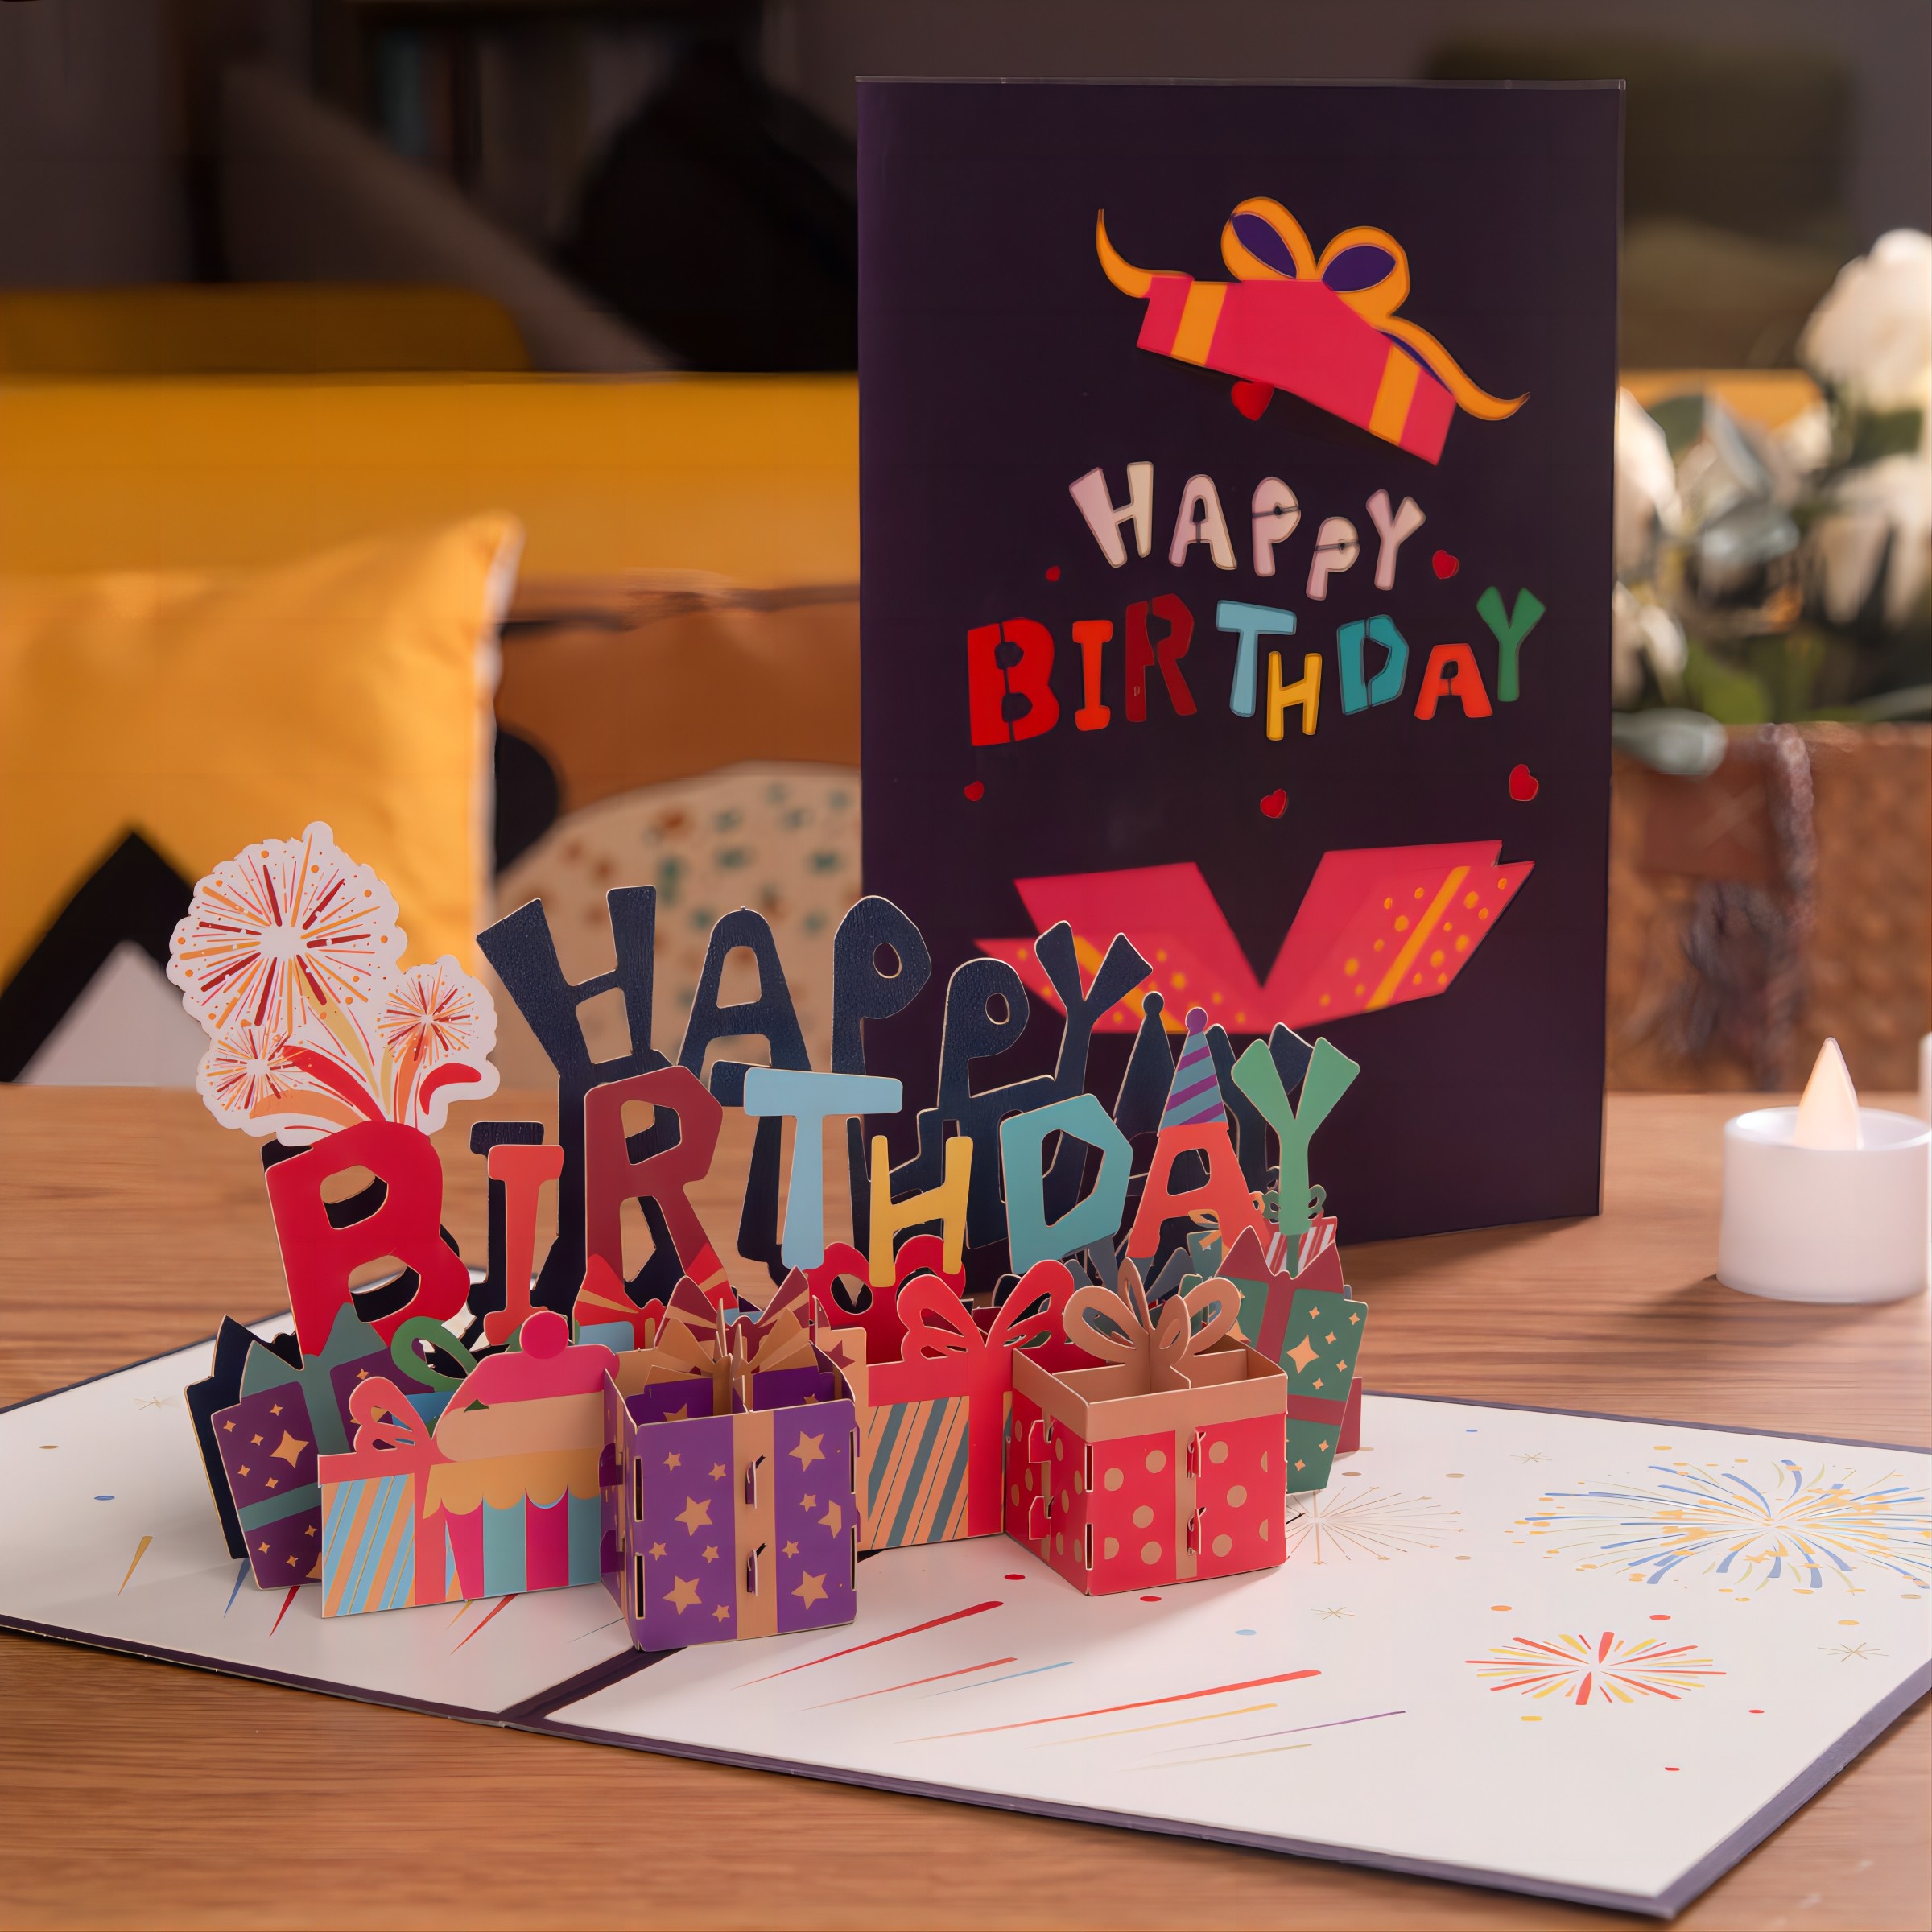 Birthday Cake 3D Pop Up Birthday Greeting Card with Envelope - Living Cabin